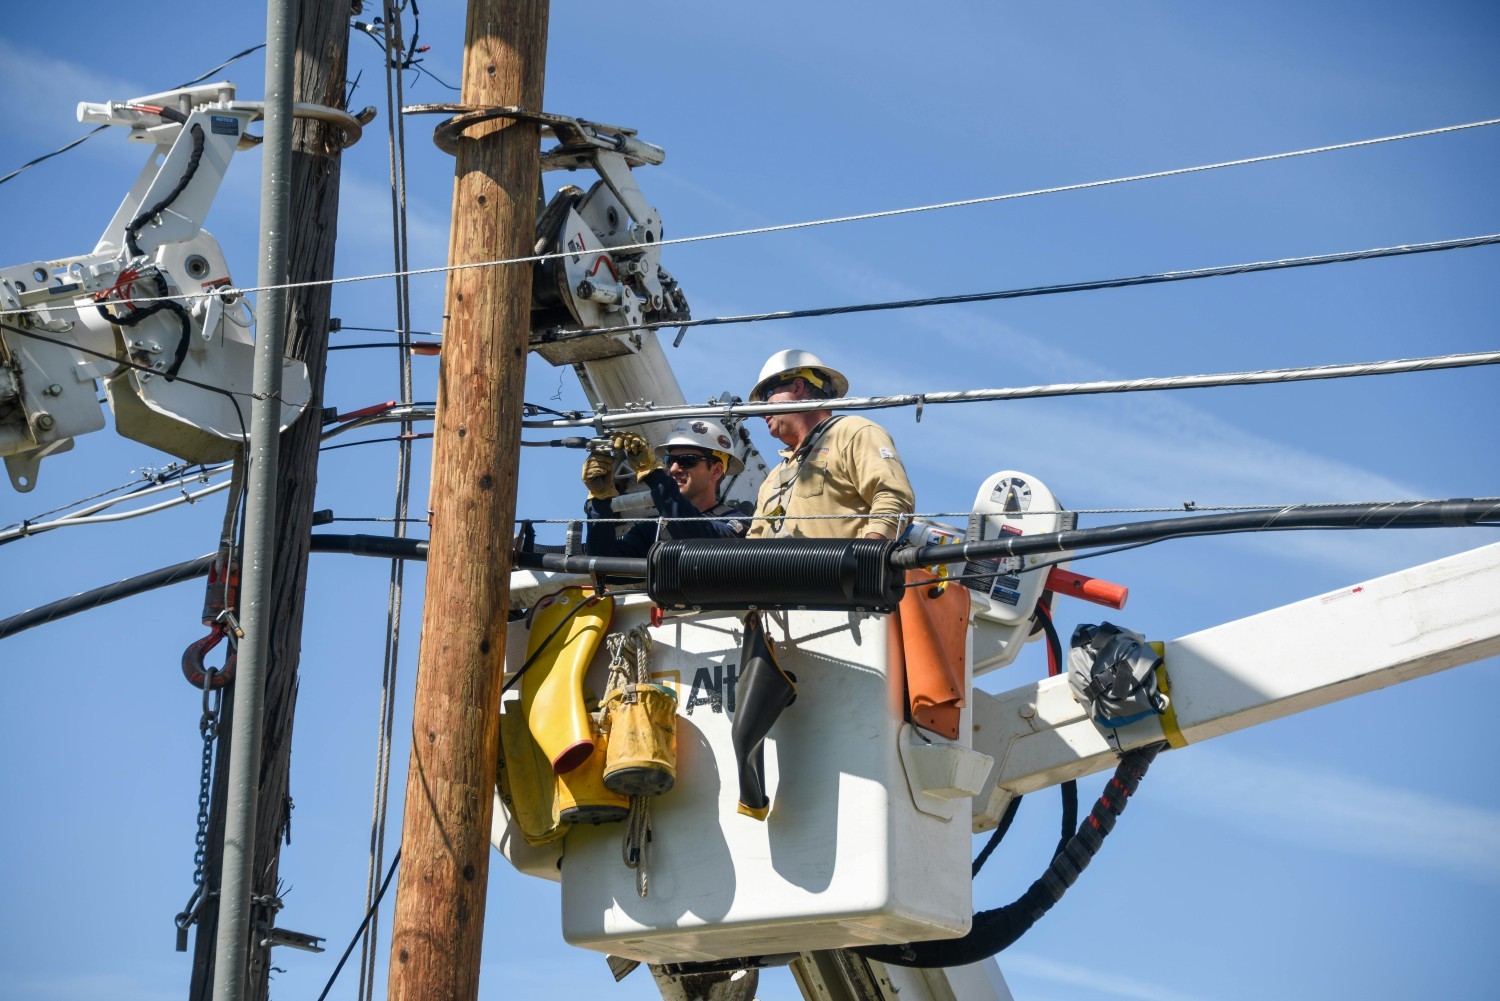 Line workers respond to restore power after a wind storm in Great Falls, Montana.